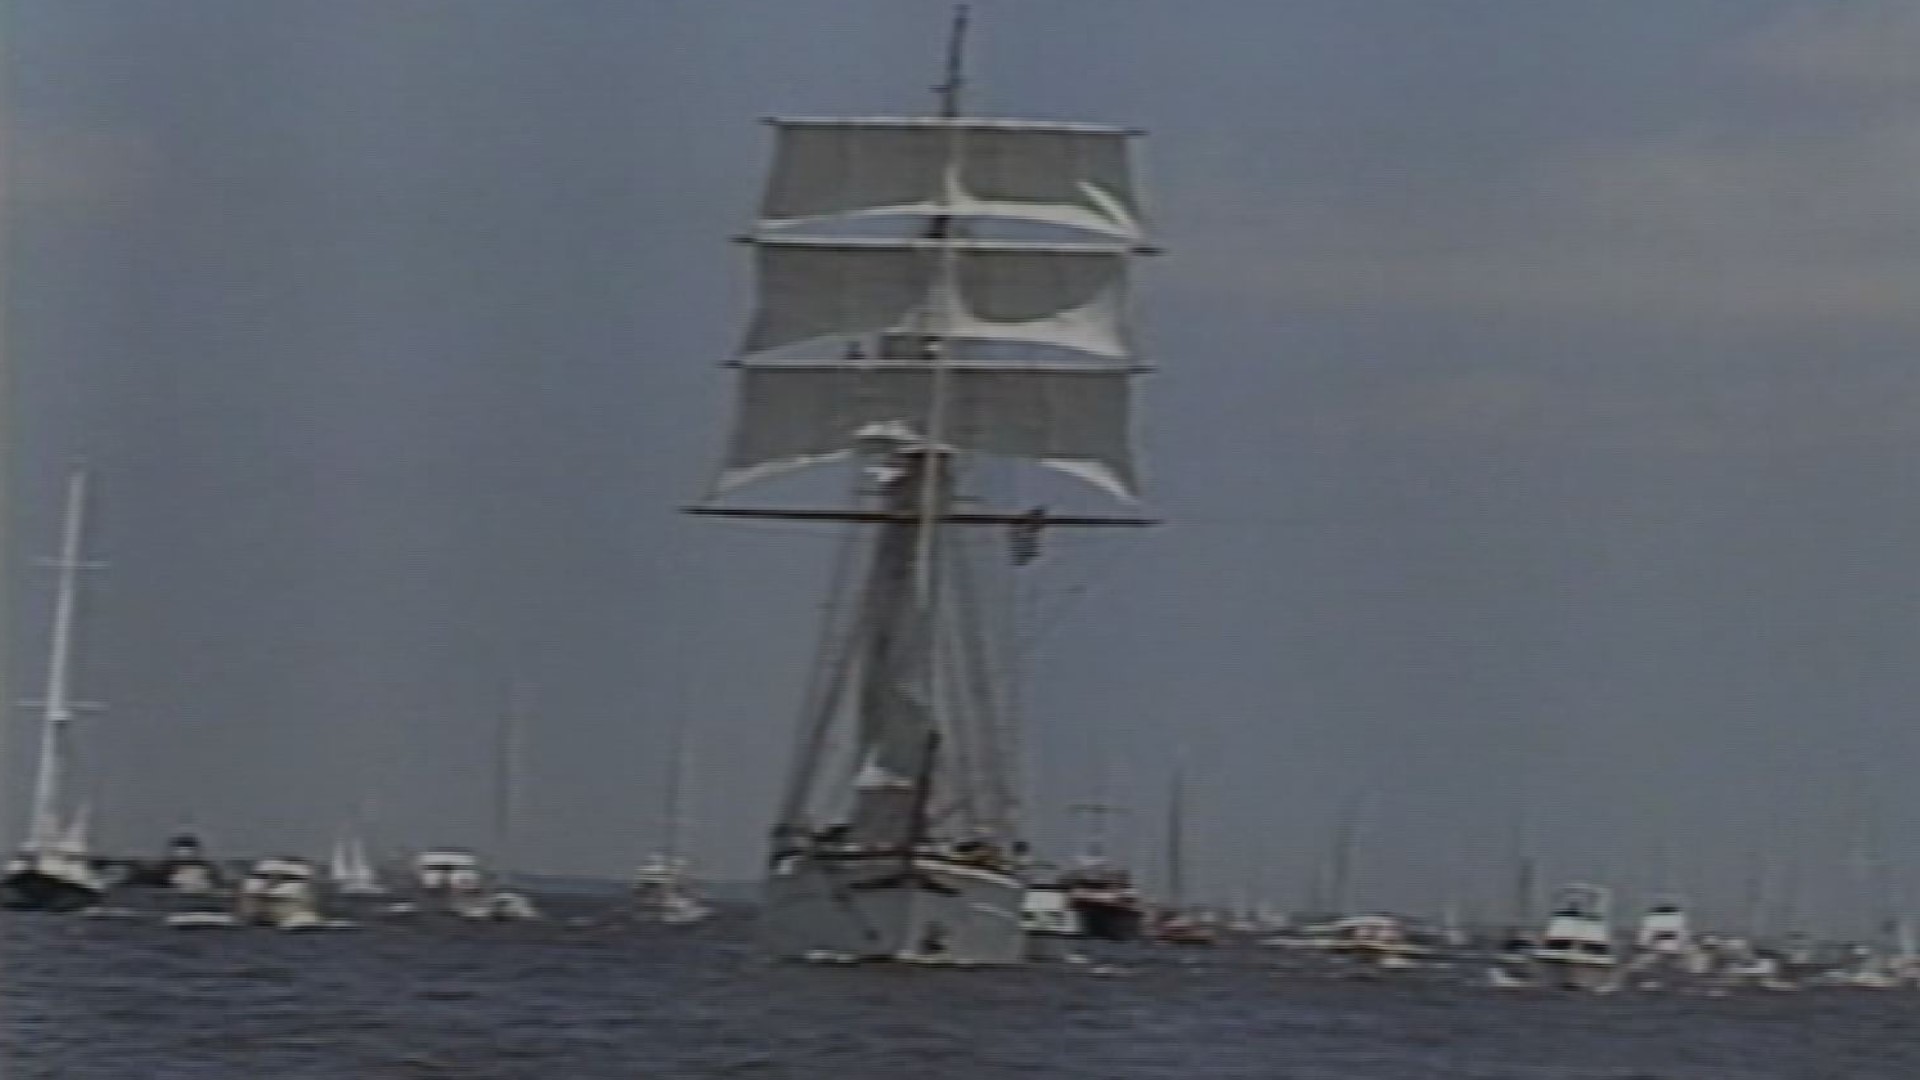 From the 13News Now archives: A look at the sights of Harborfest '84, from the Parade of Sail to the festivities in the harbor to the fireworks at night. Originally aired on May 27, 1984. Due to the age of the source tape, there are some audio and visual glitches in this video.